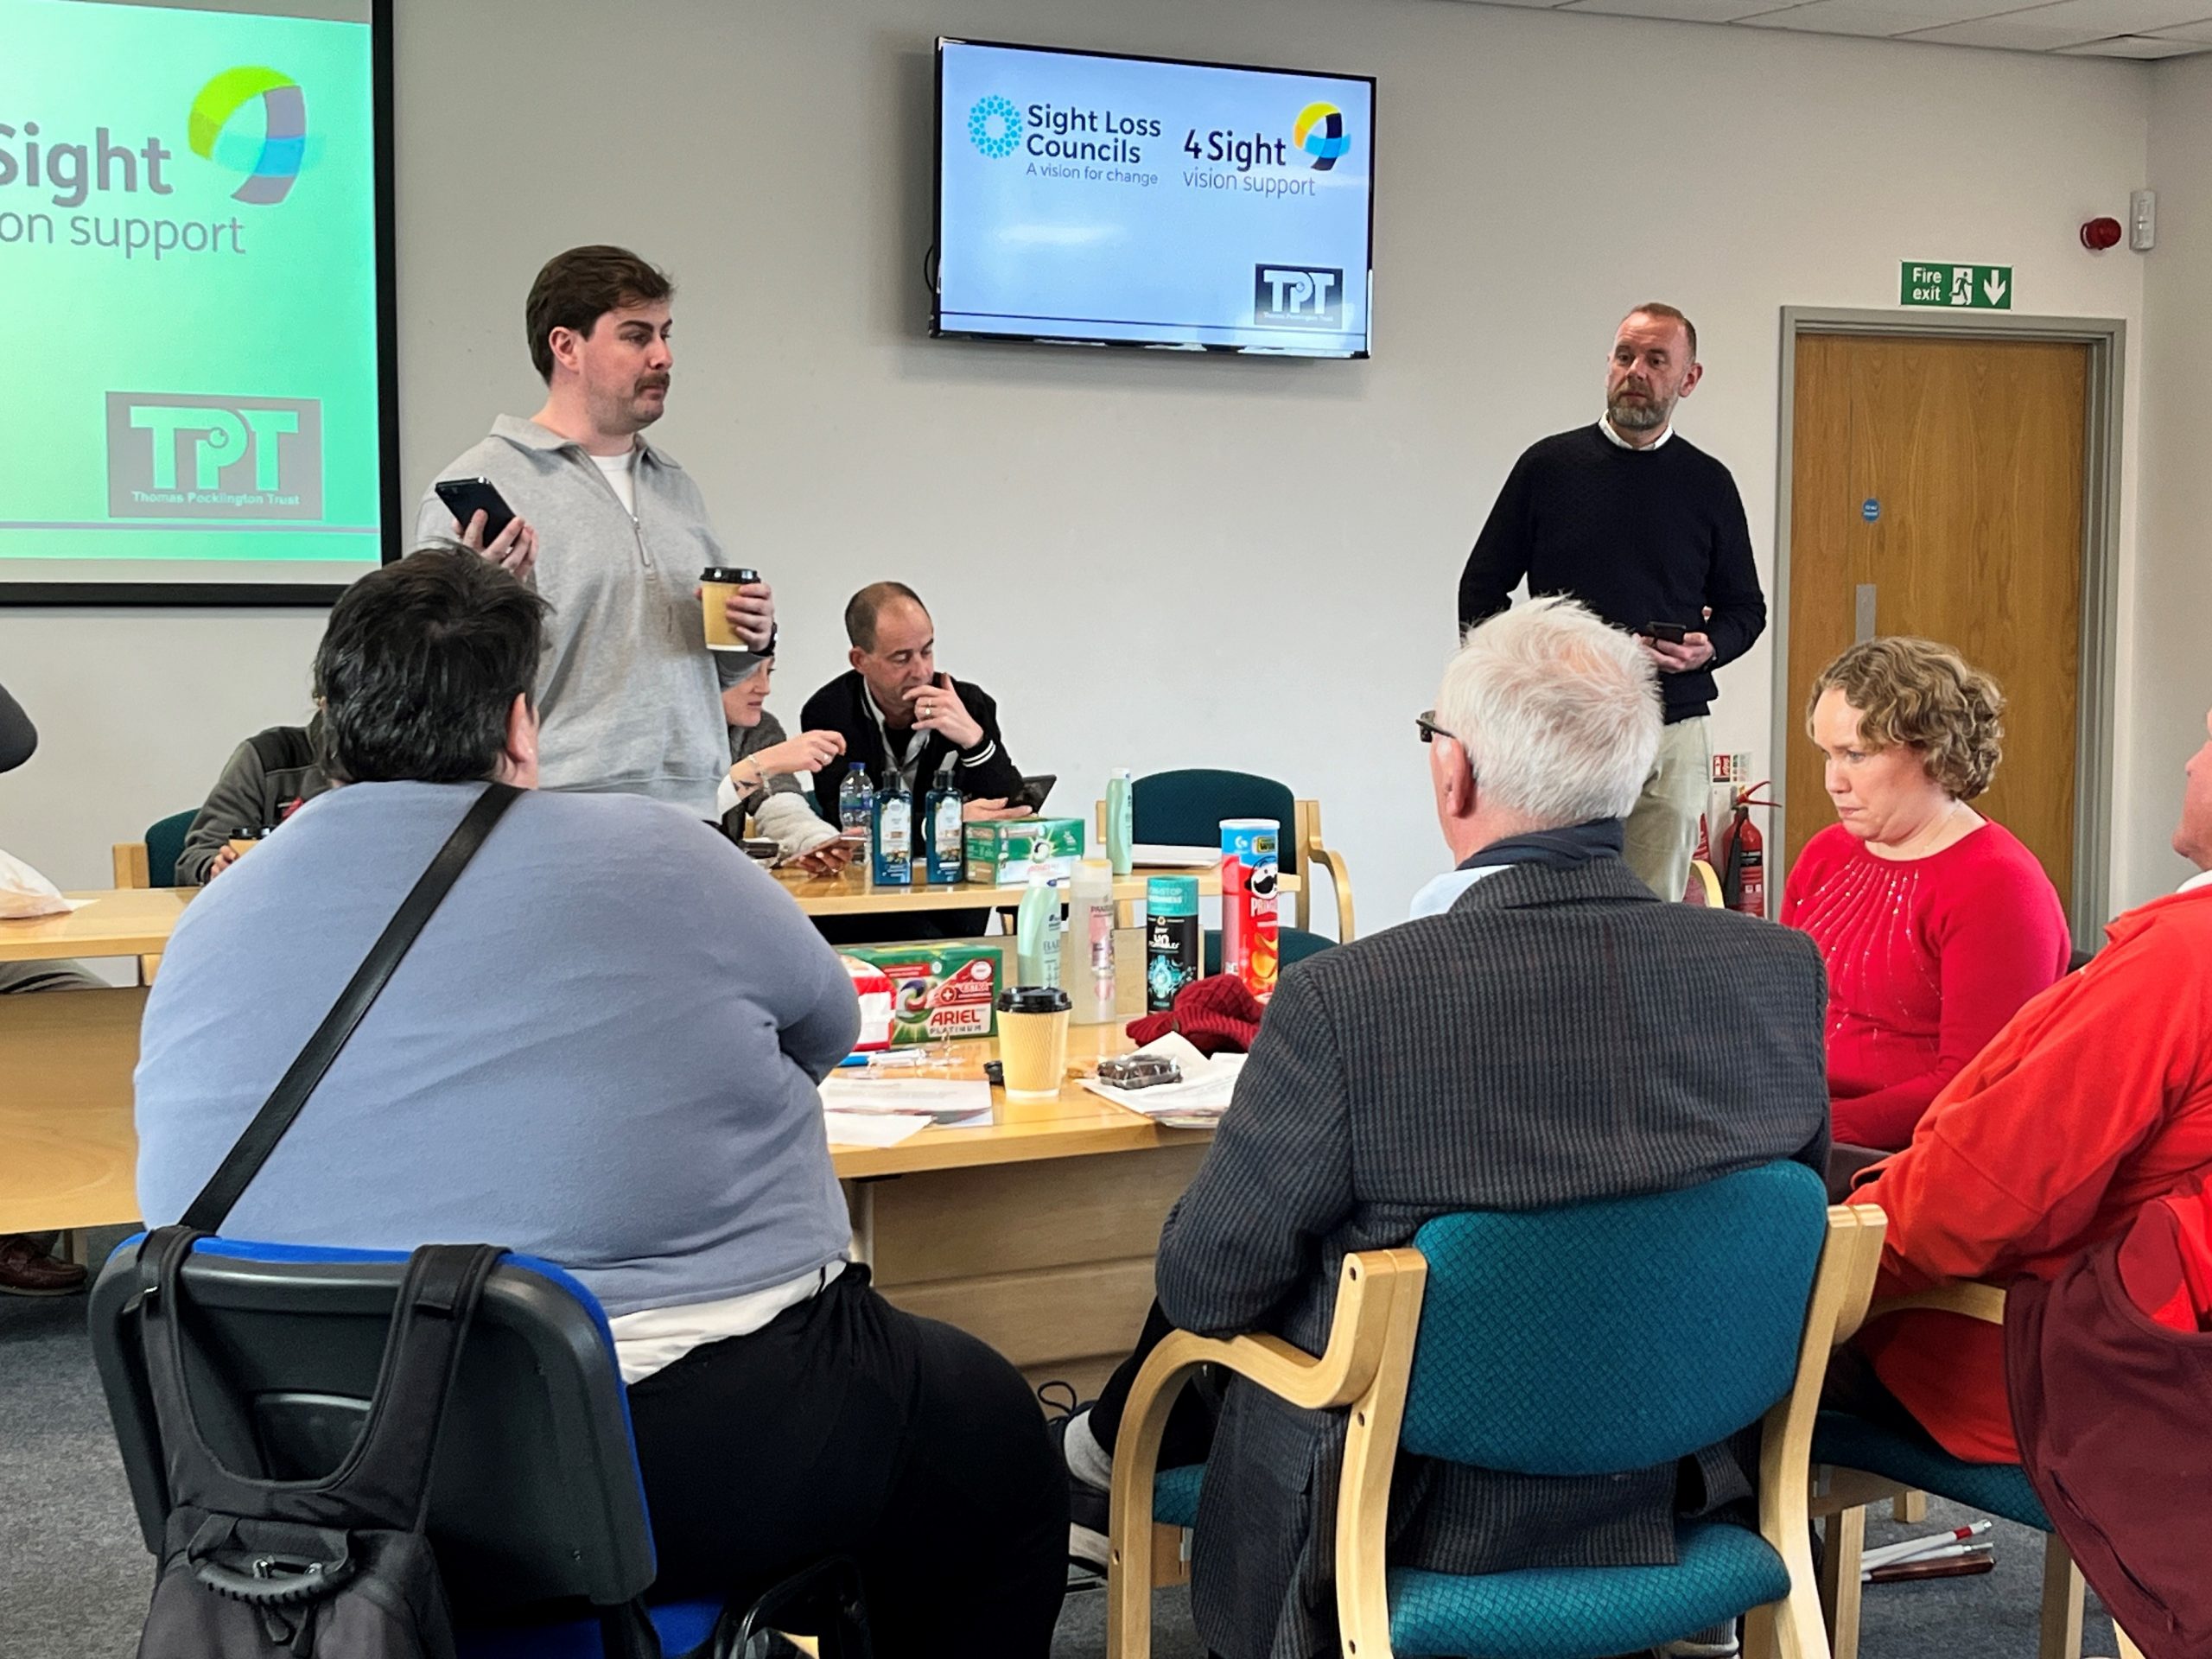 Paul Gallagher, P&G, and Oran McAlistair, NaviLens, are both standing during their presentation to blind and partially sighted delegates.